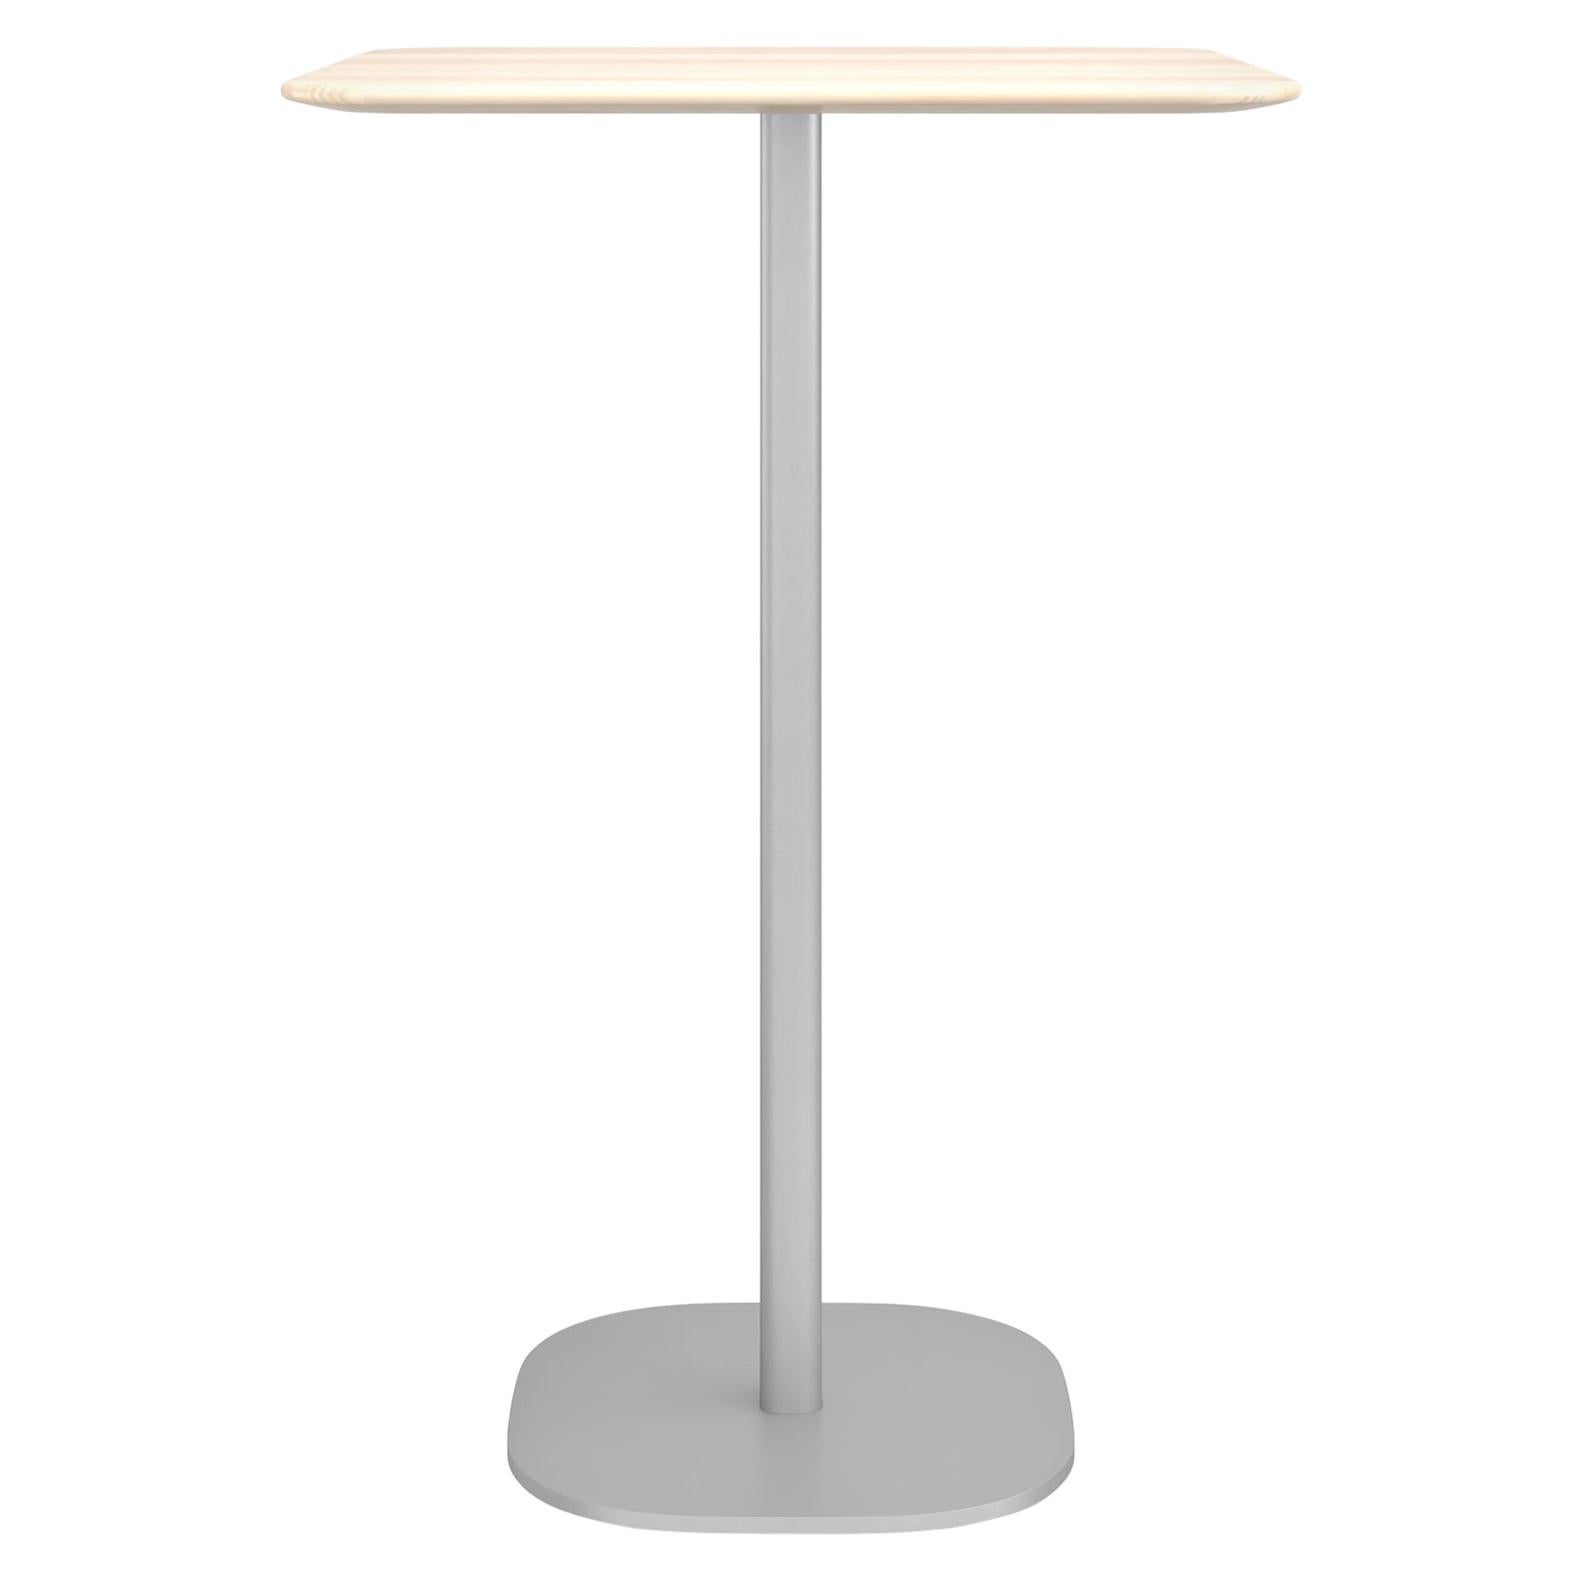 Emeco 2 Inch Large Bar Table with Aluminum Legs & Wood Top by Jasper Morrison